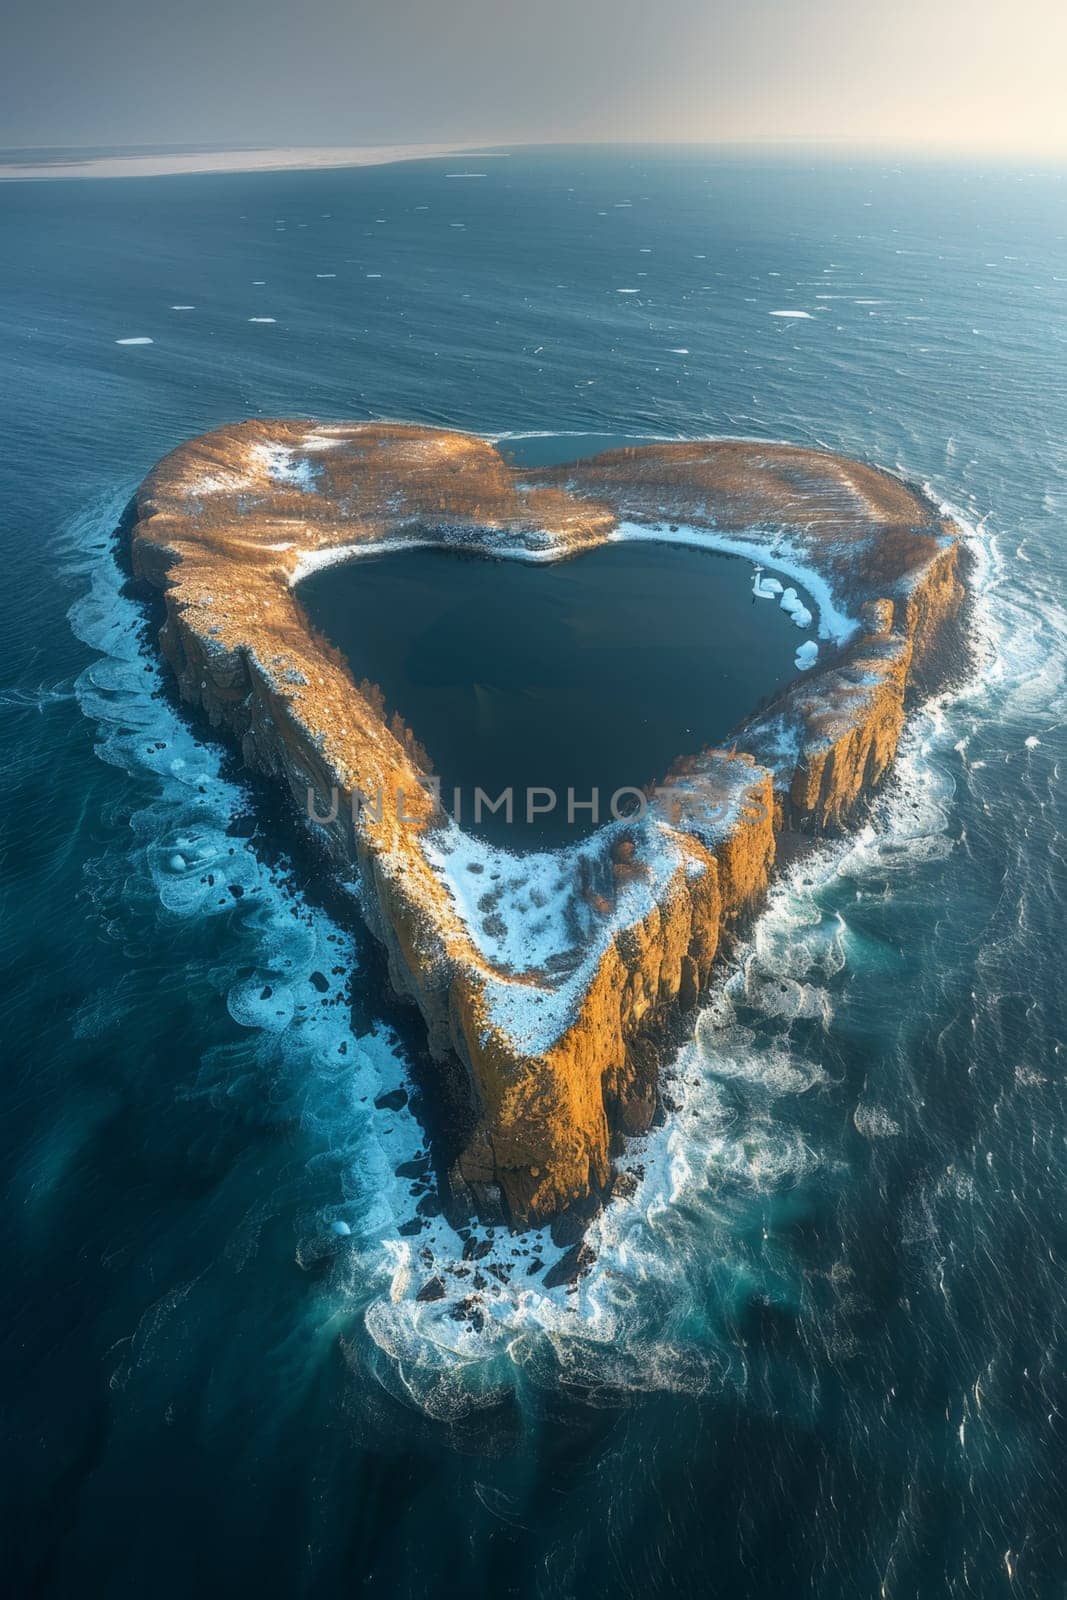 An island in the sea in the shape of a heart.